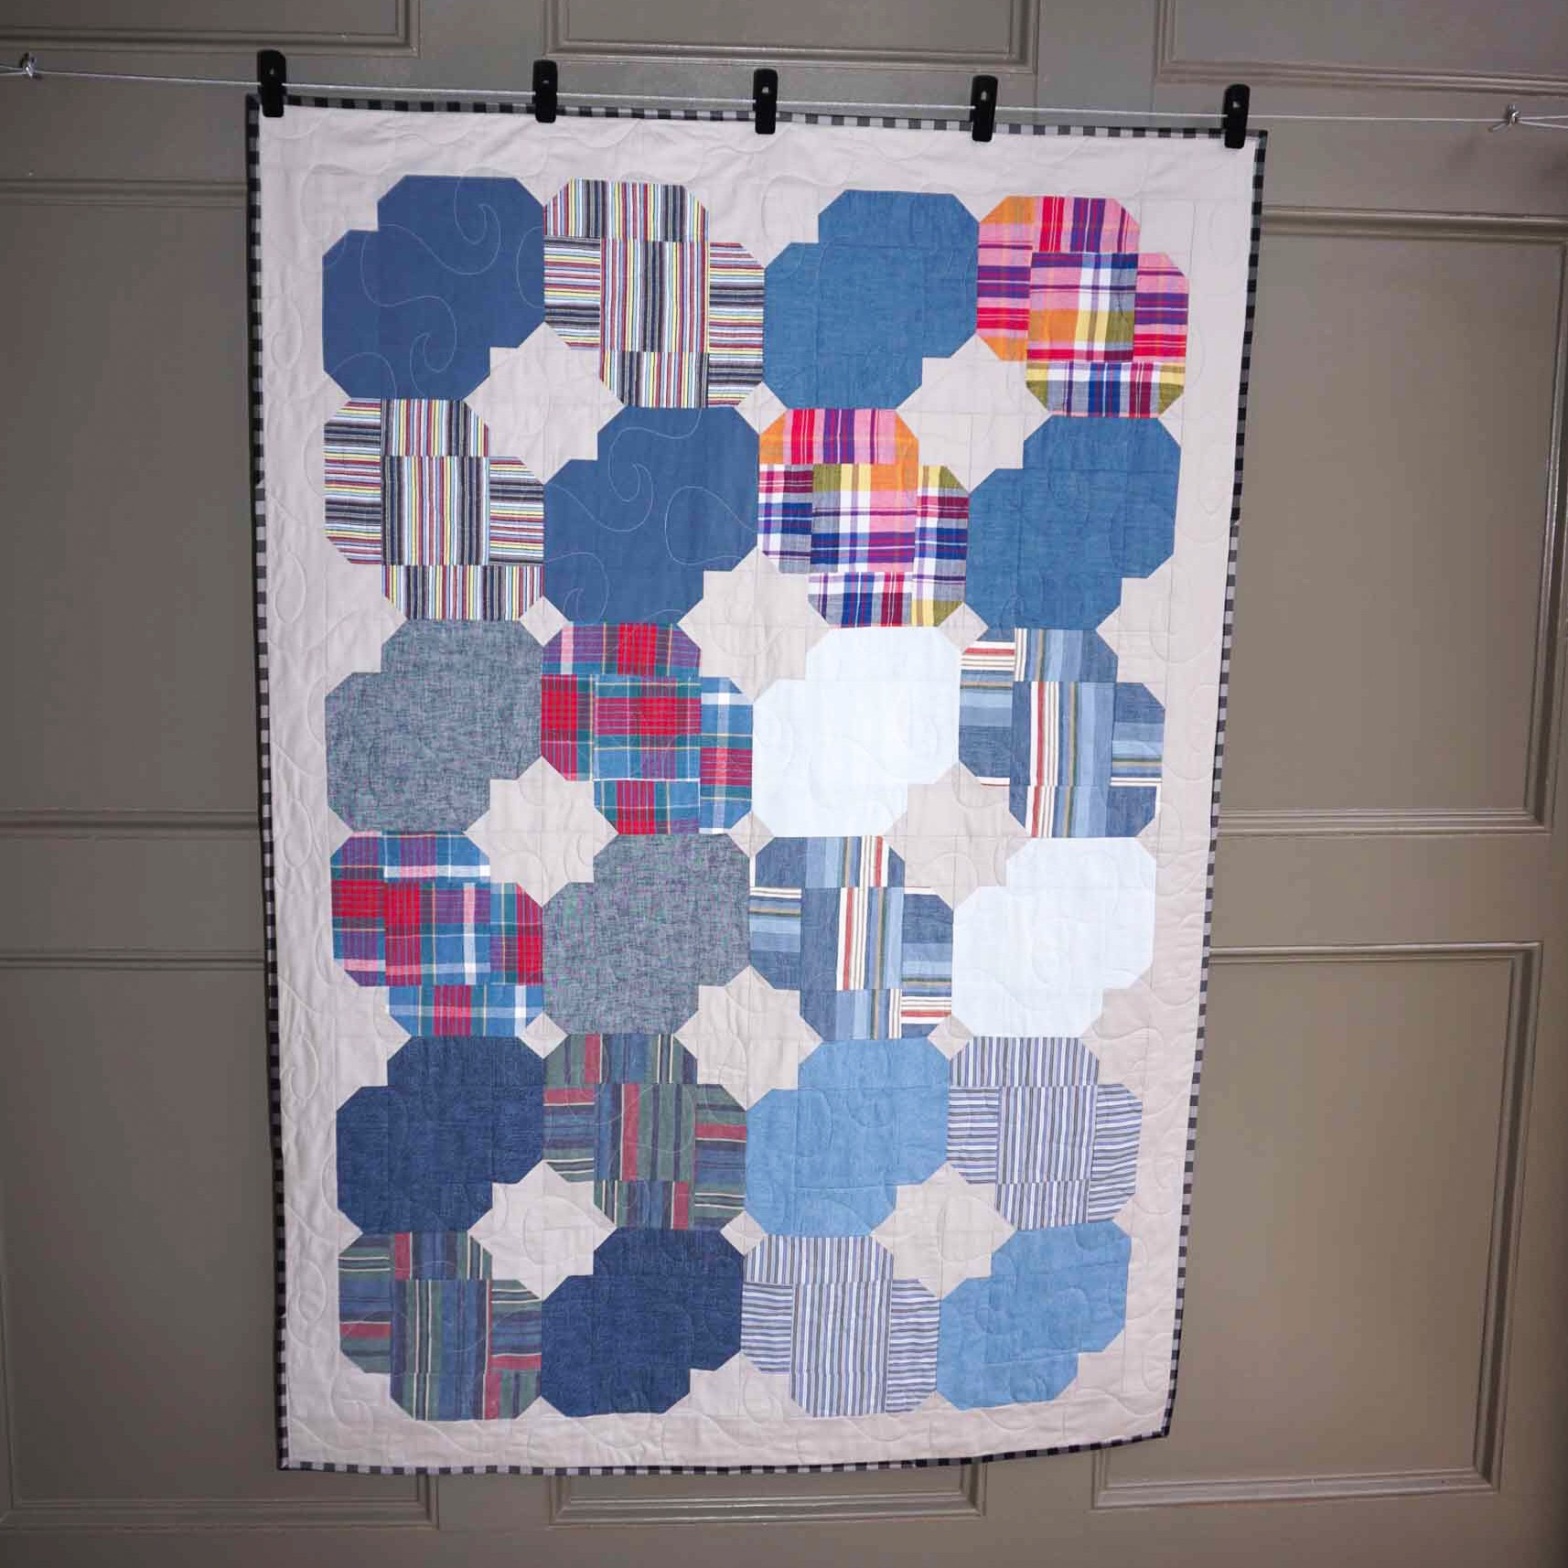 Memorial Memory Quilt using Tapestry pattern in It’s Sew Emma’s Fat Quarter Style